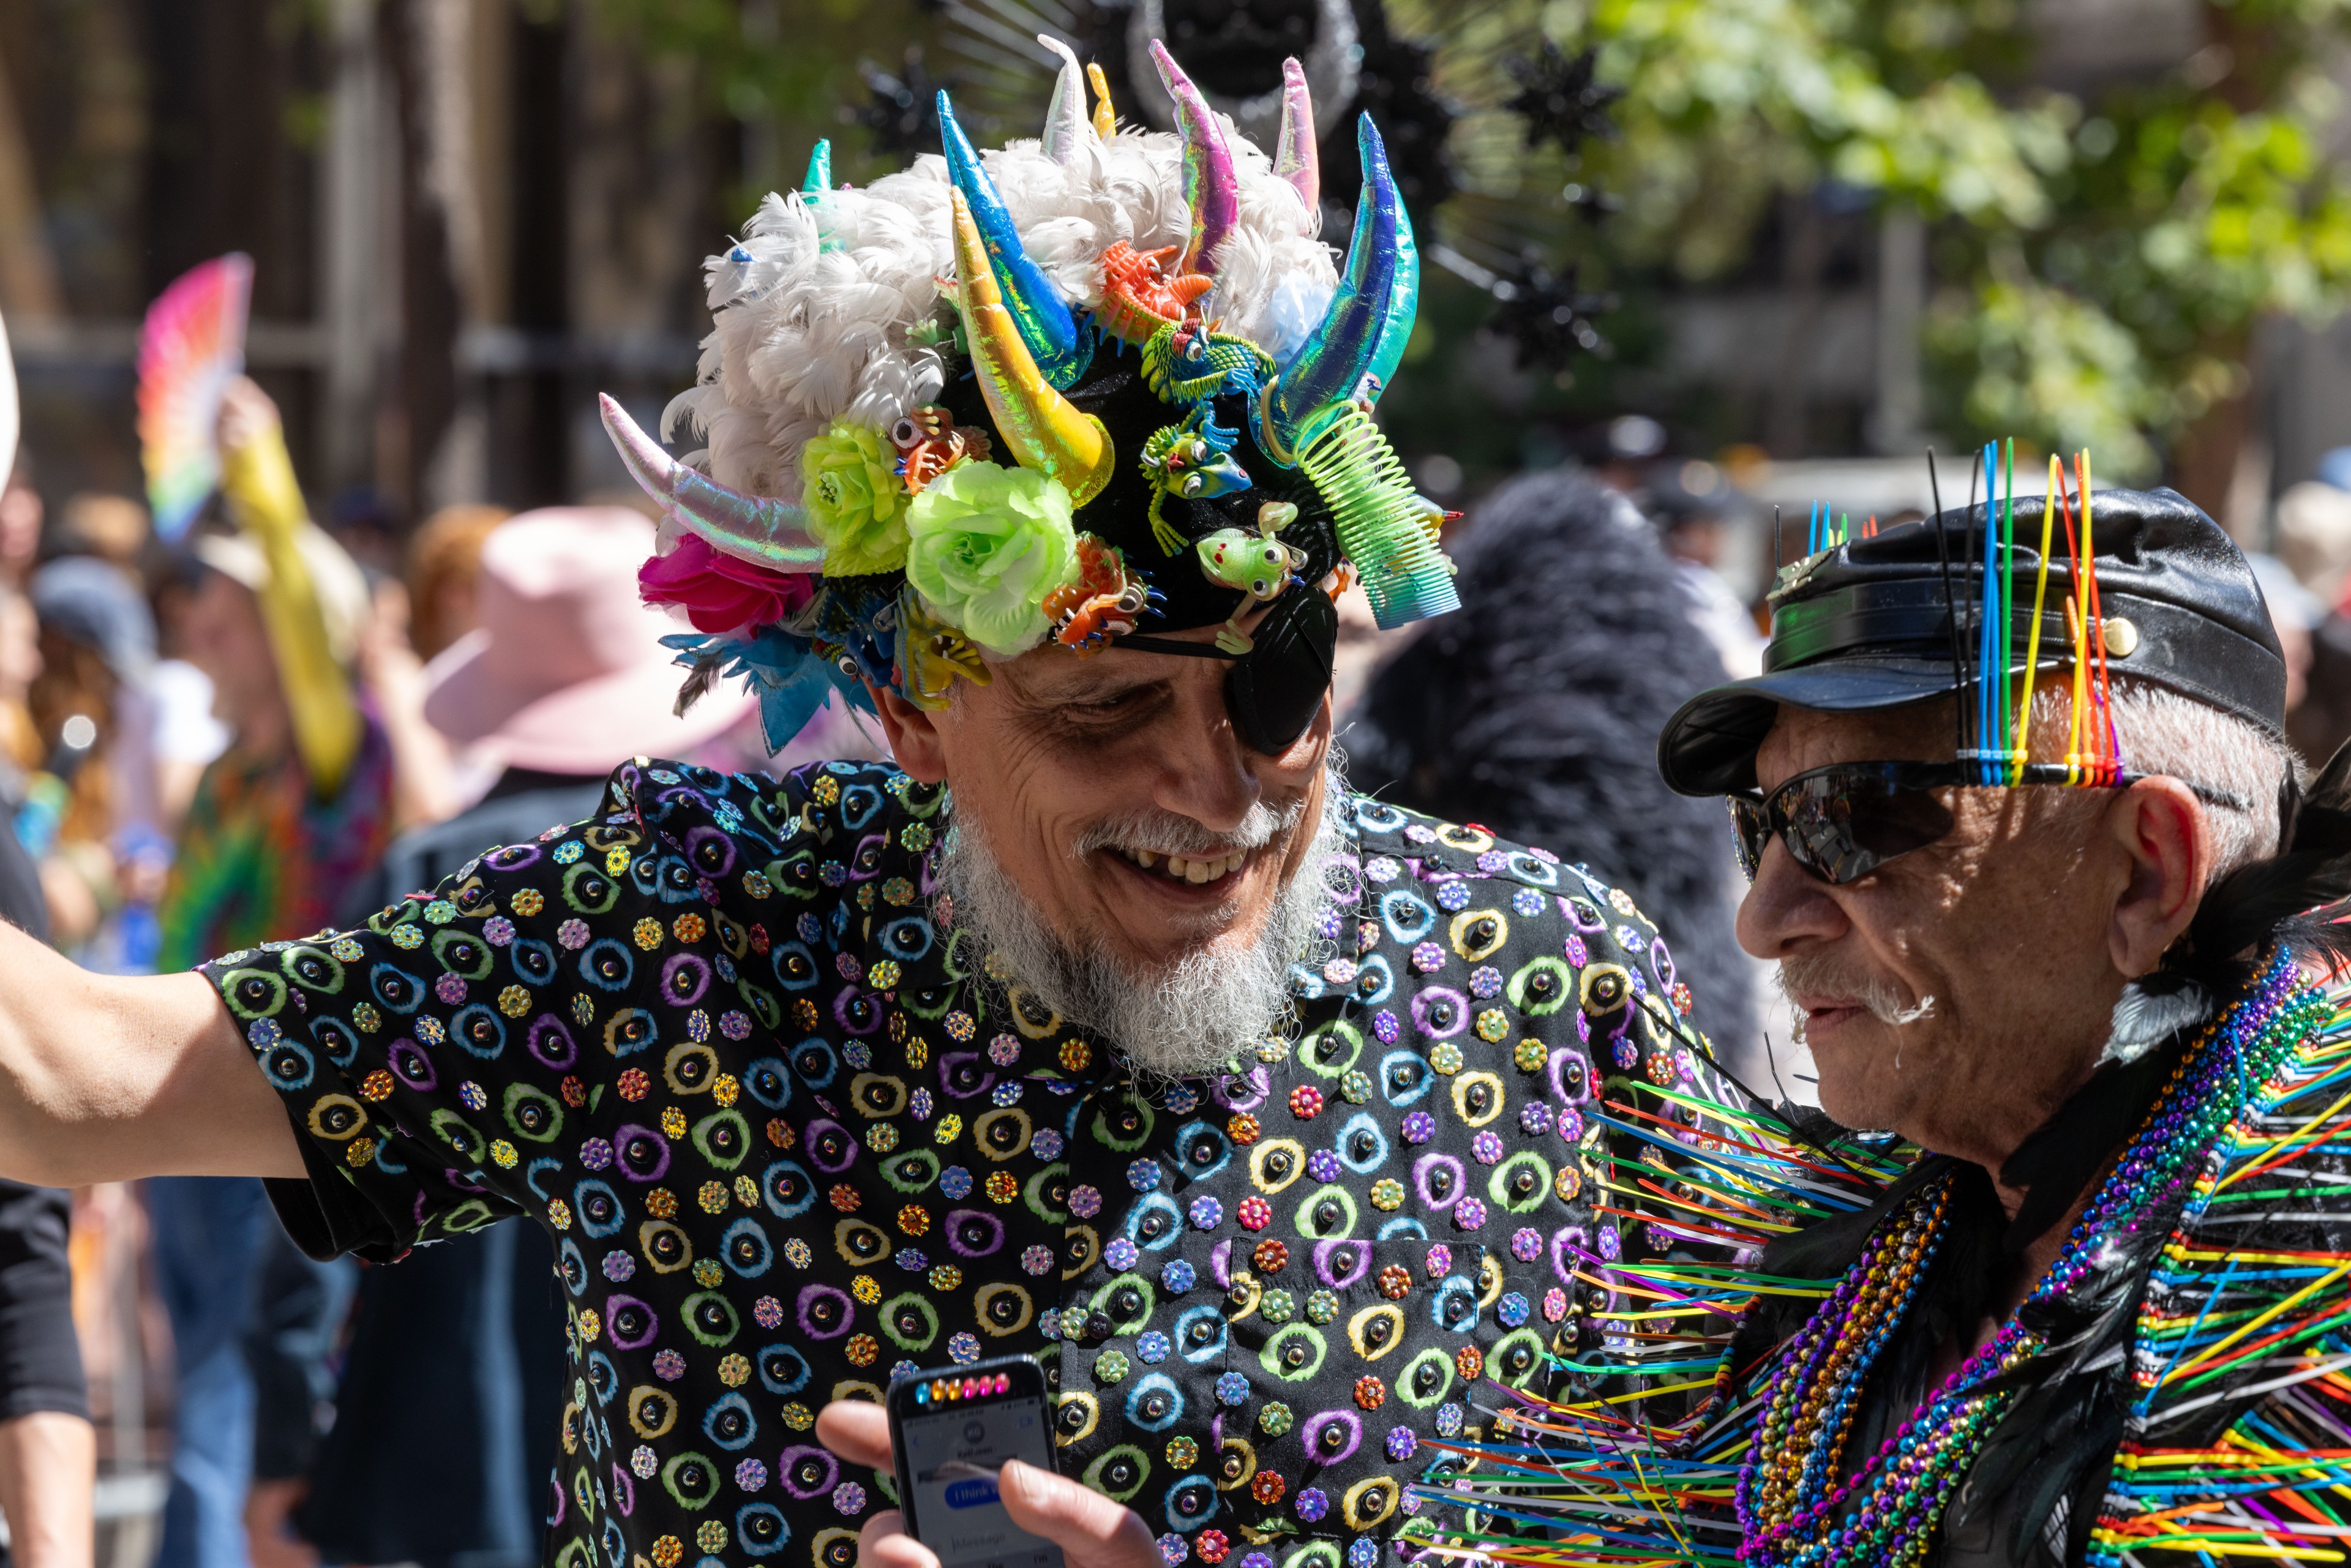 Two men in colorful, eccentric outfits are smiling and talking. One has a hat with multicolored horns and flowers; the other wears a hat with rainbow decorations.